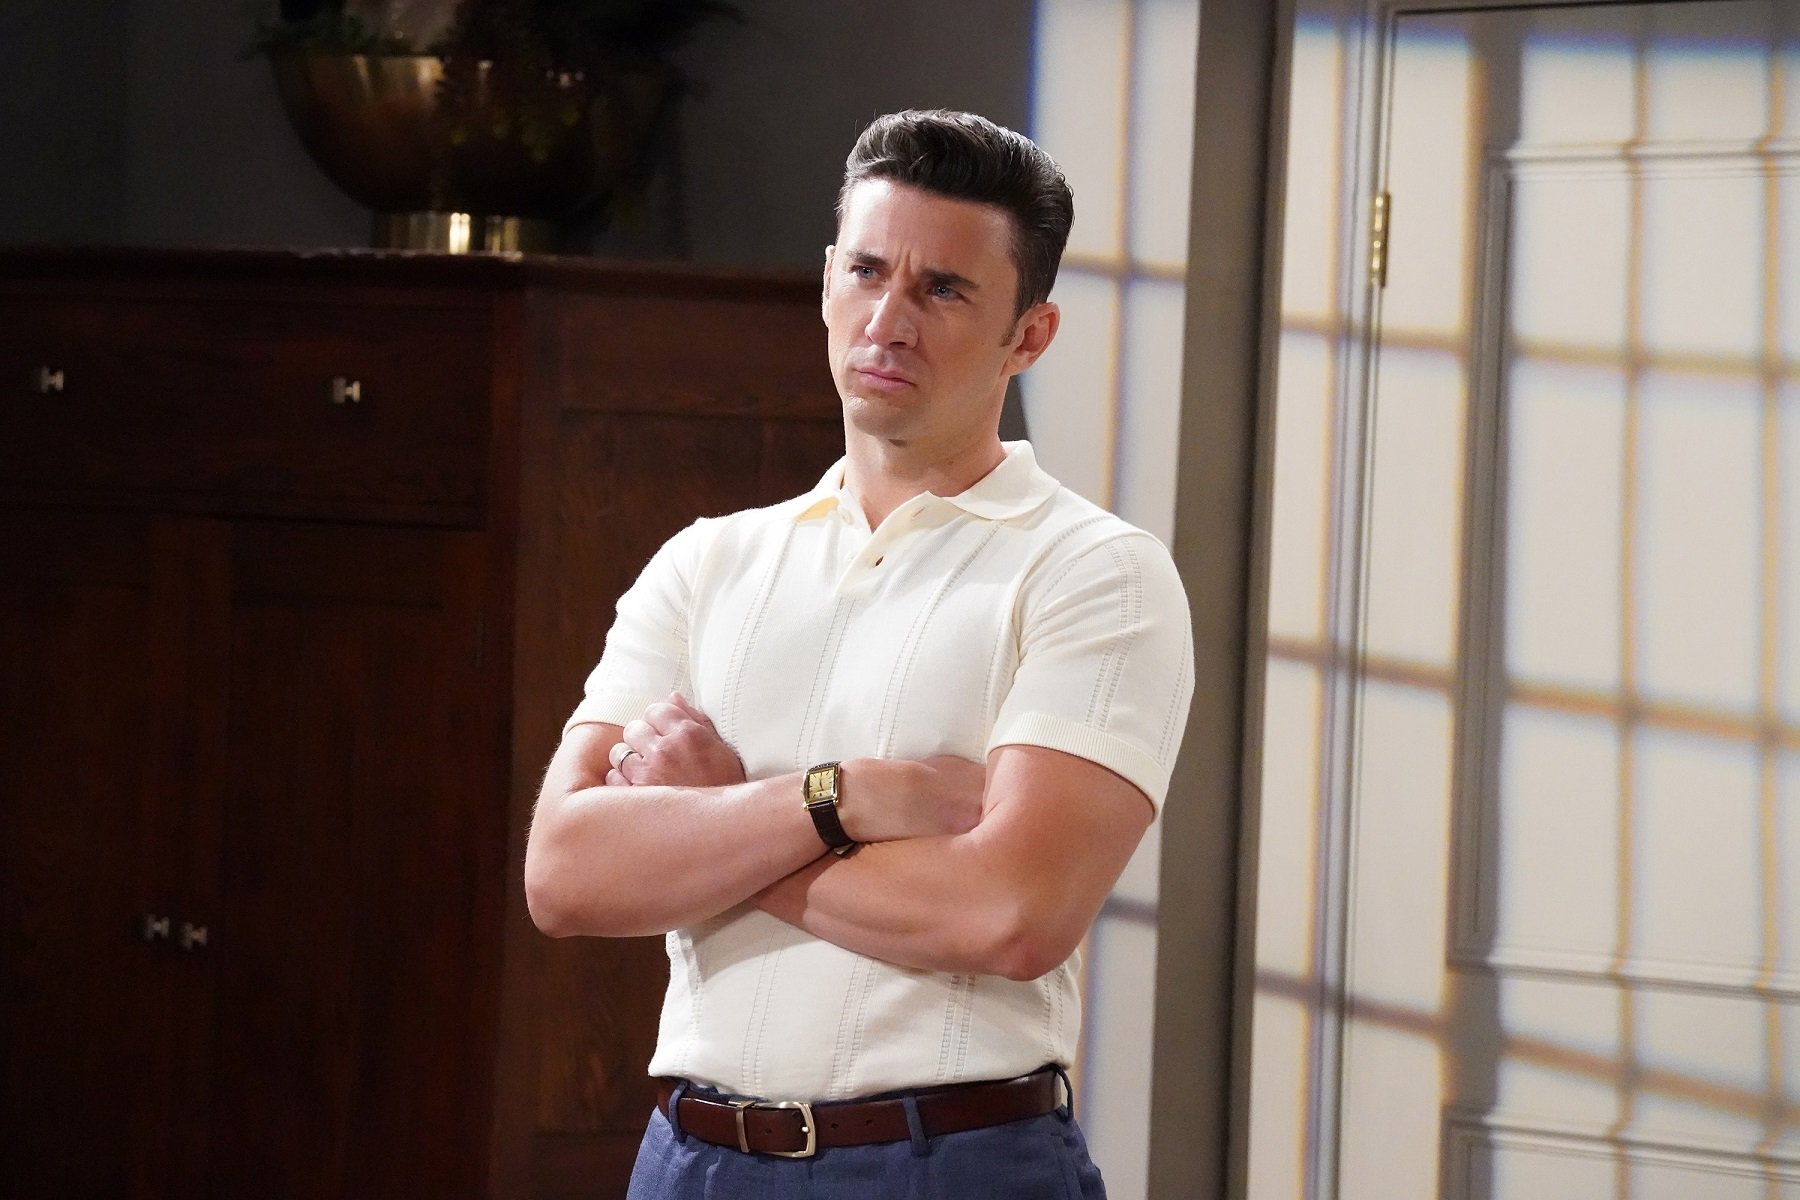 Days of Our lives spoilers focus on Chad, pictured here in a white Polo shirt